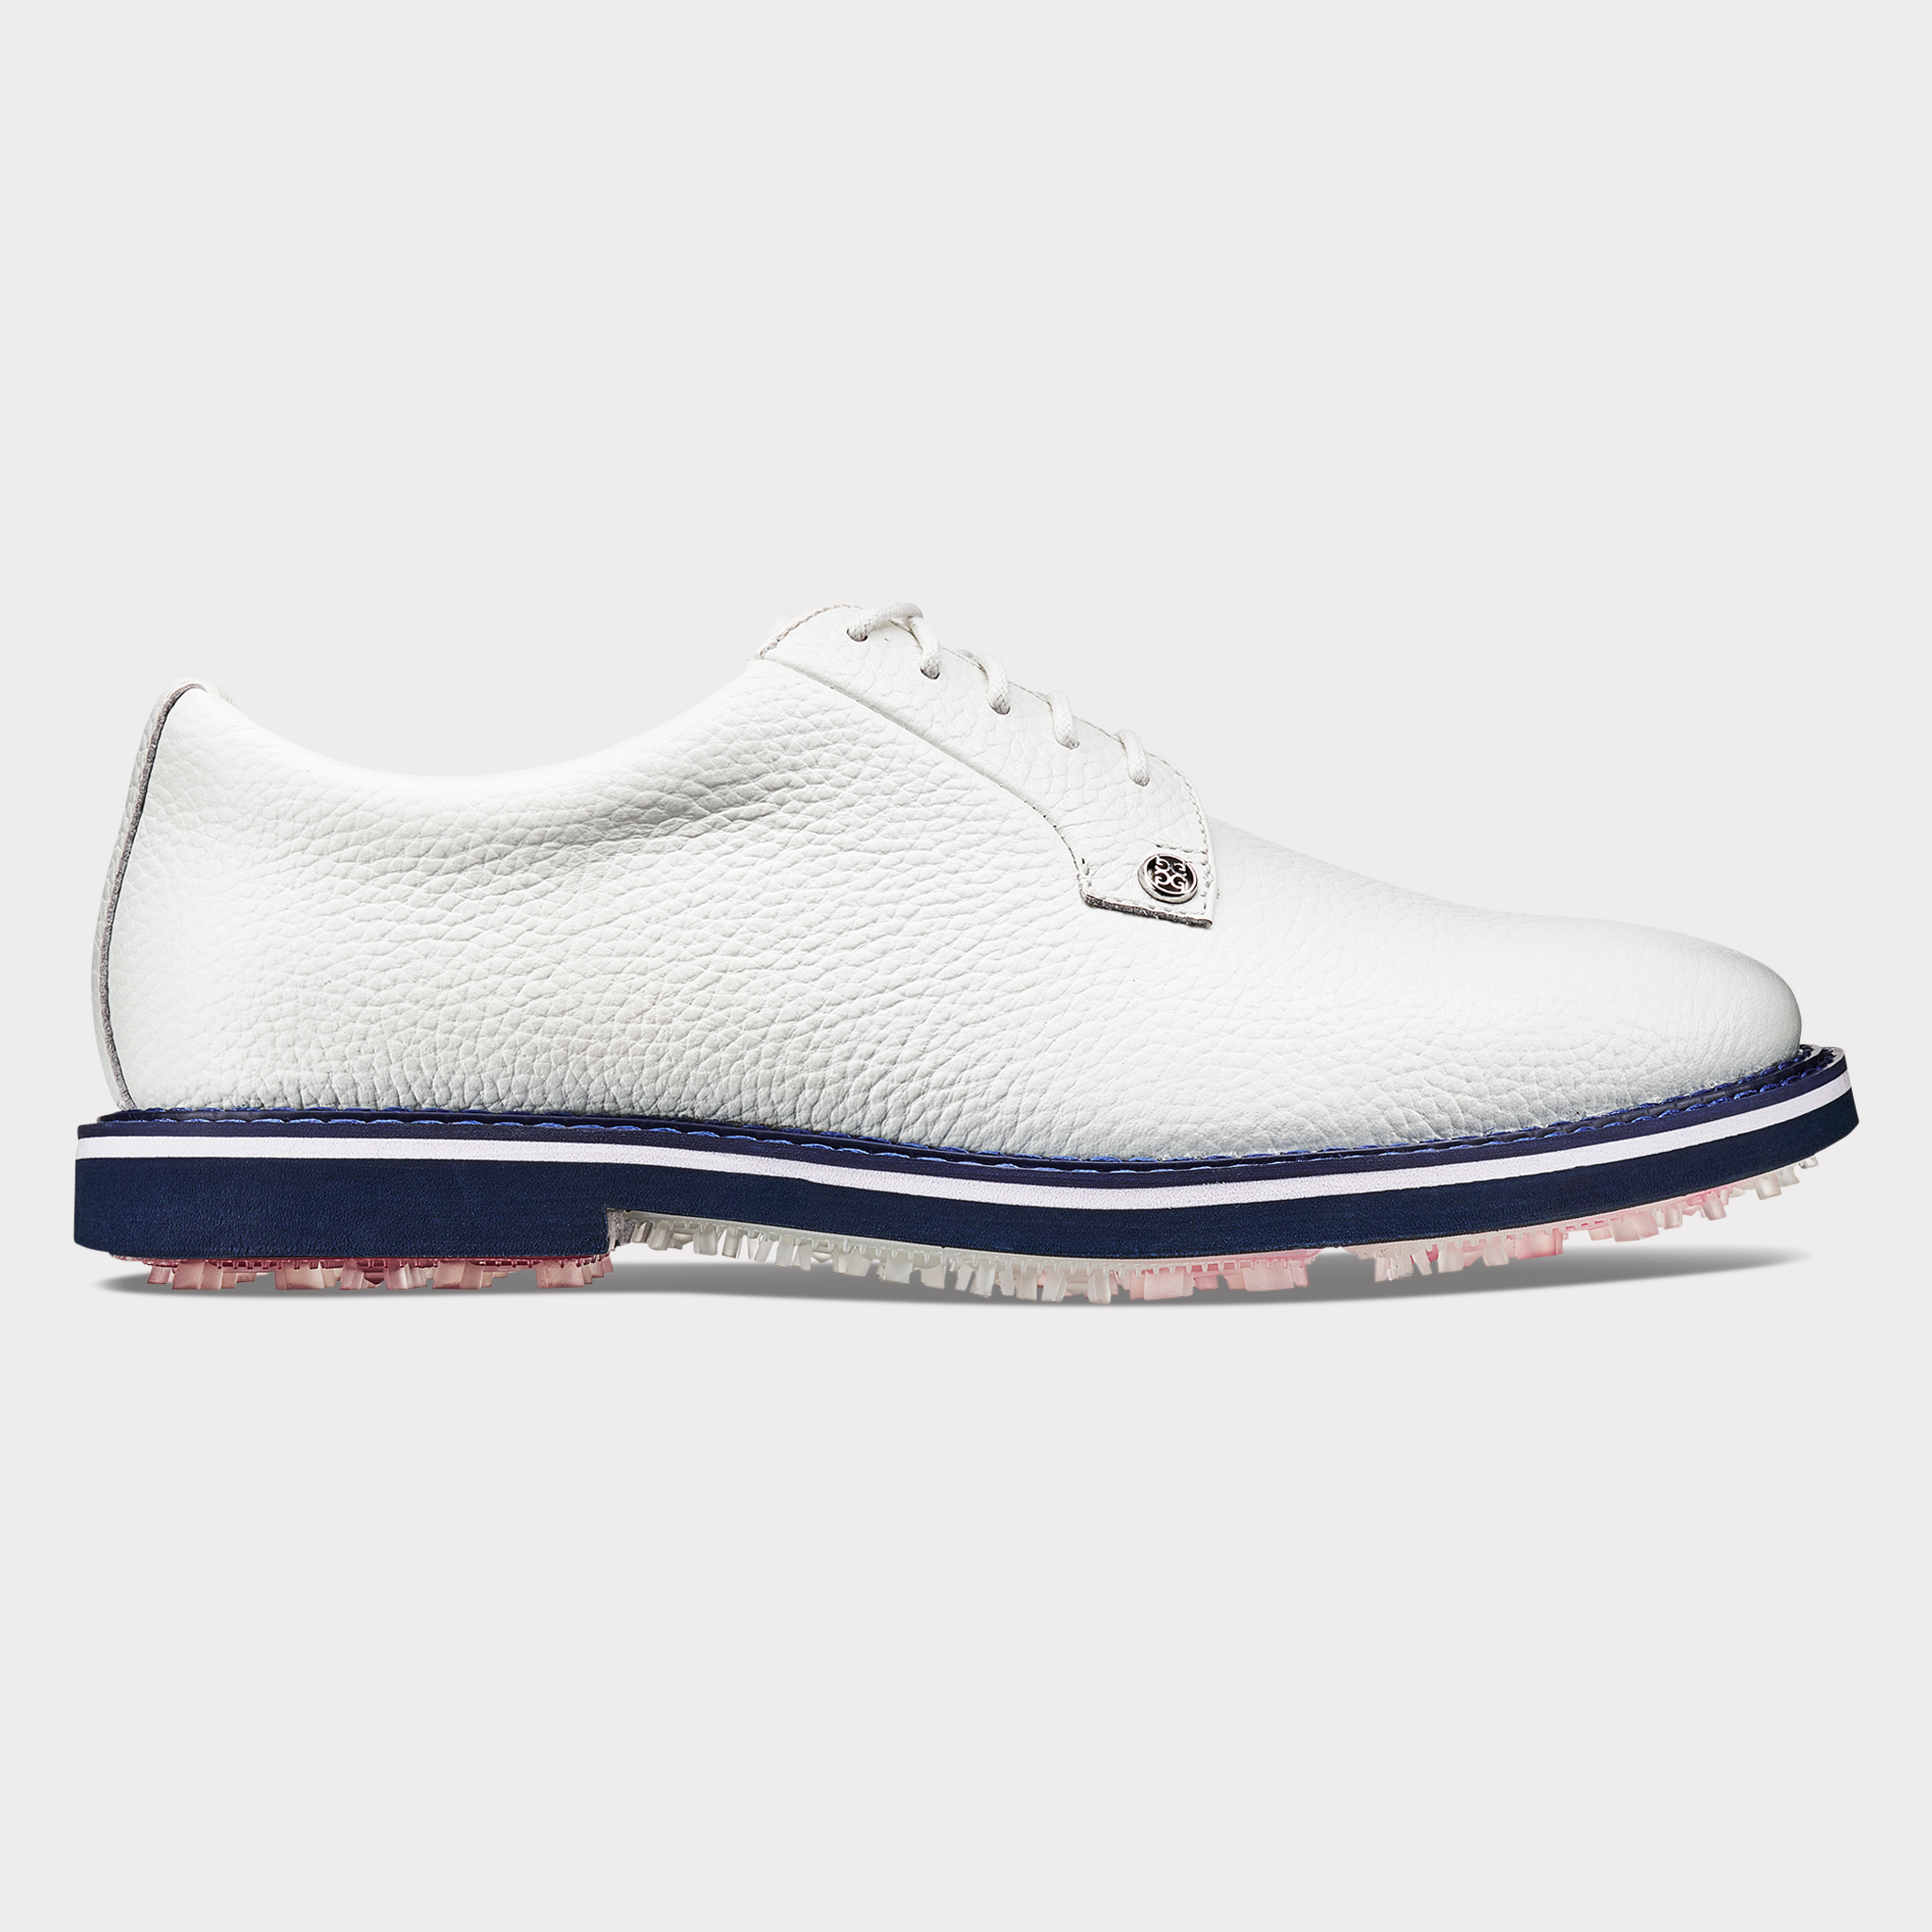 Comfortable Golf Shoes